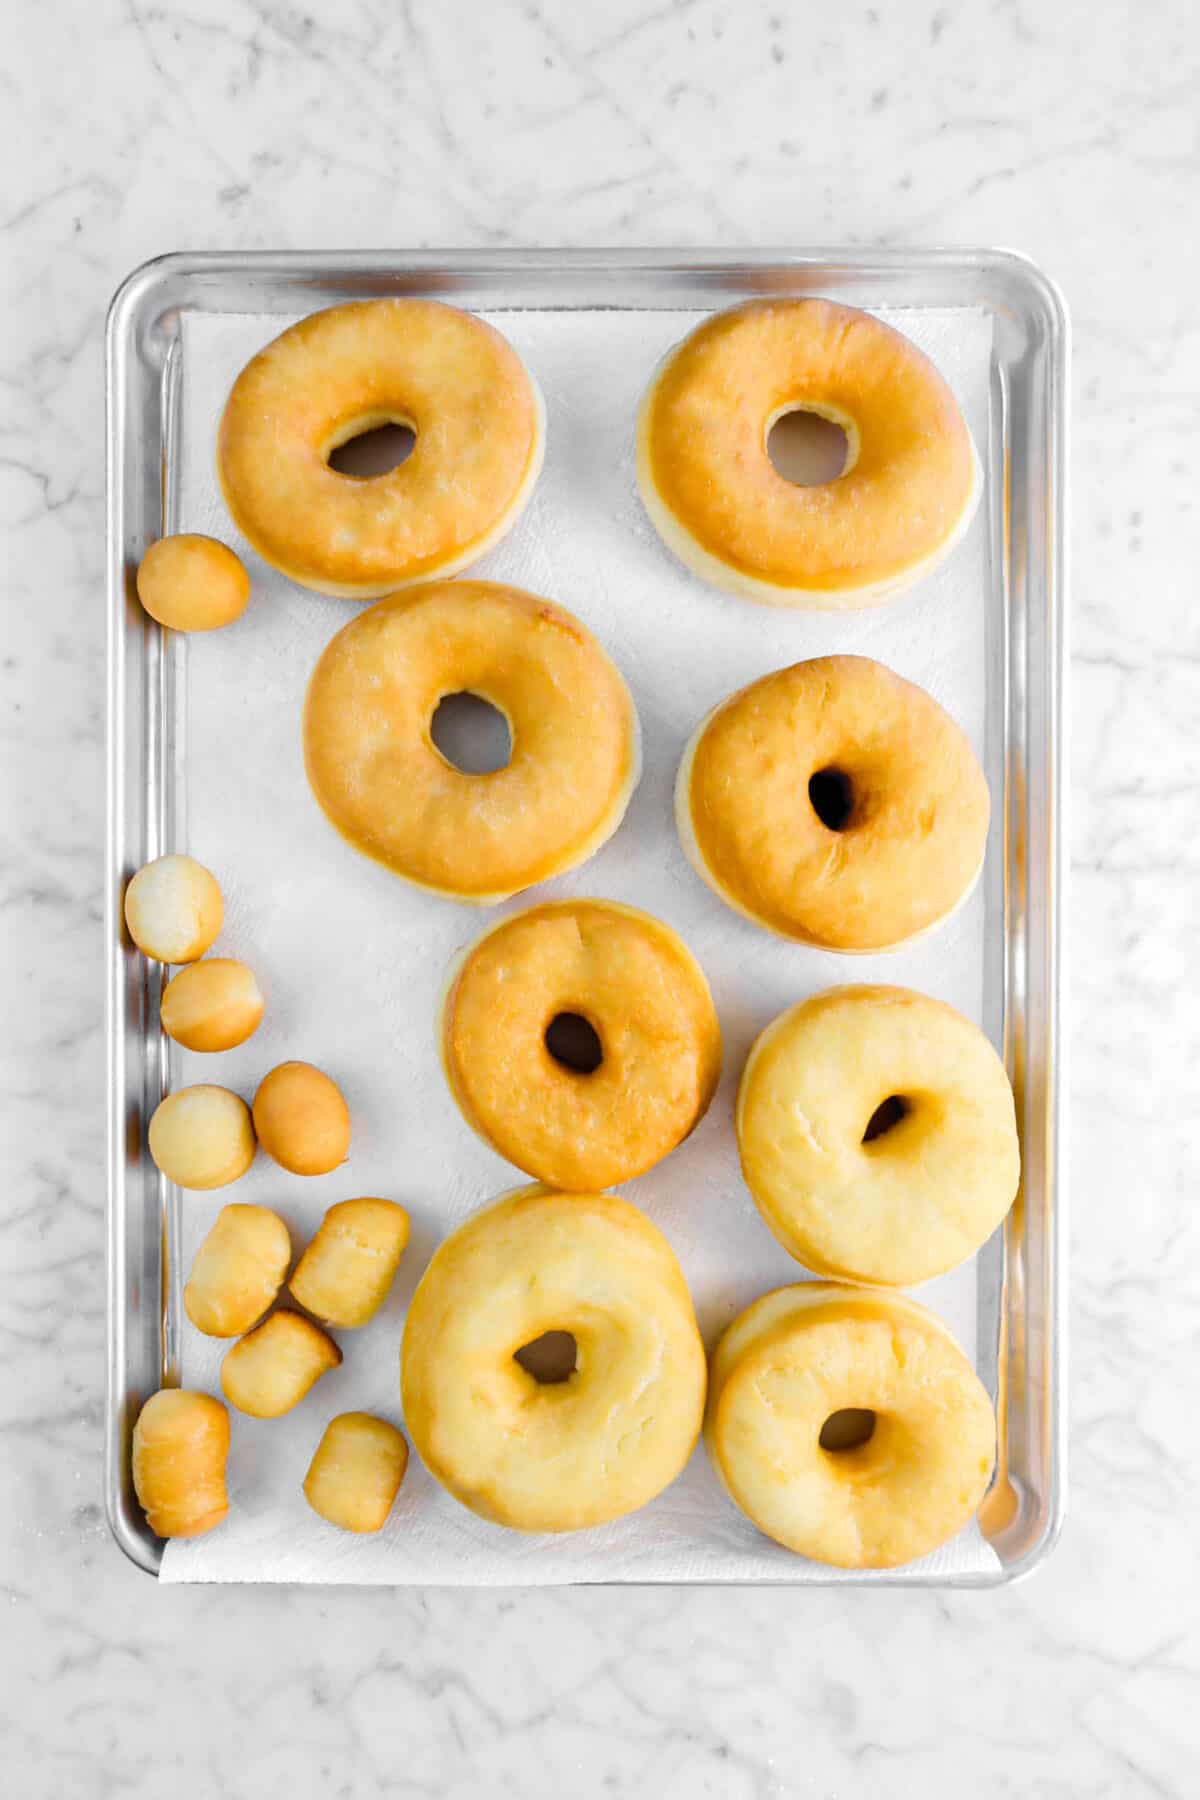 fried doughnuts on sheet pan with paper towels